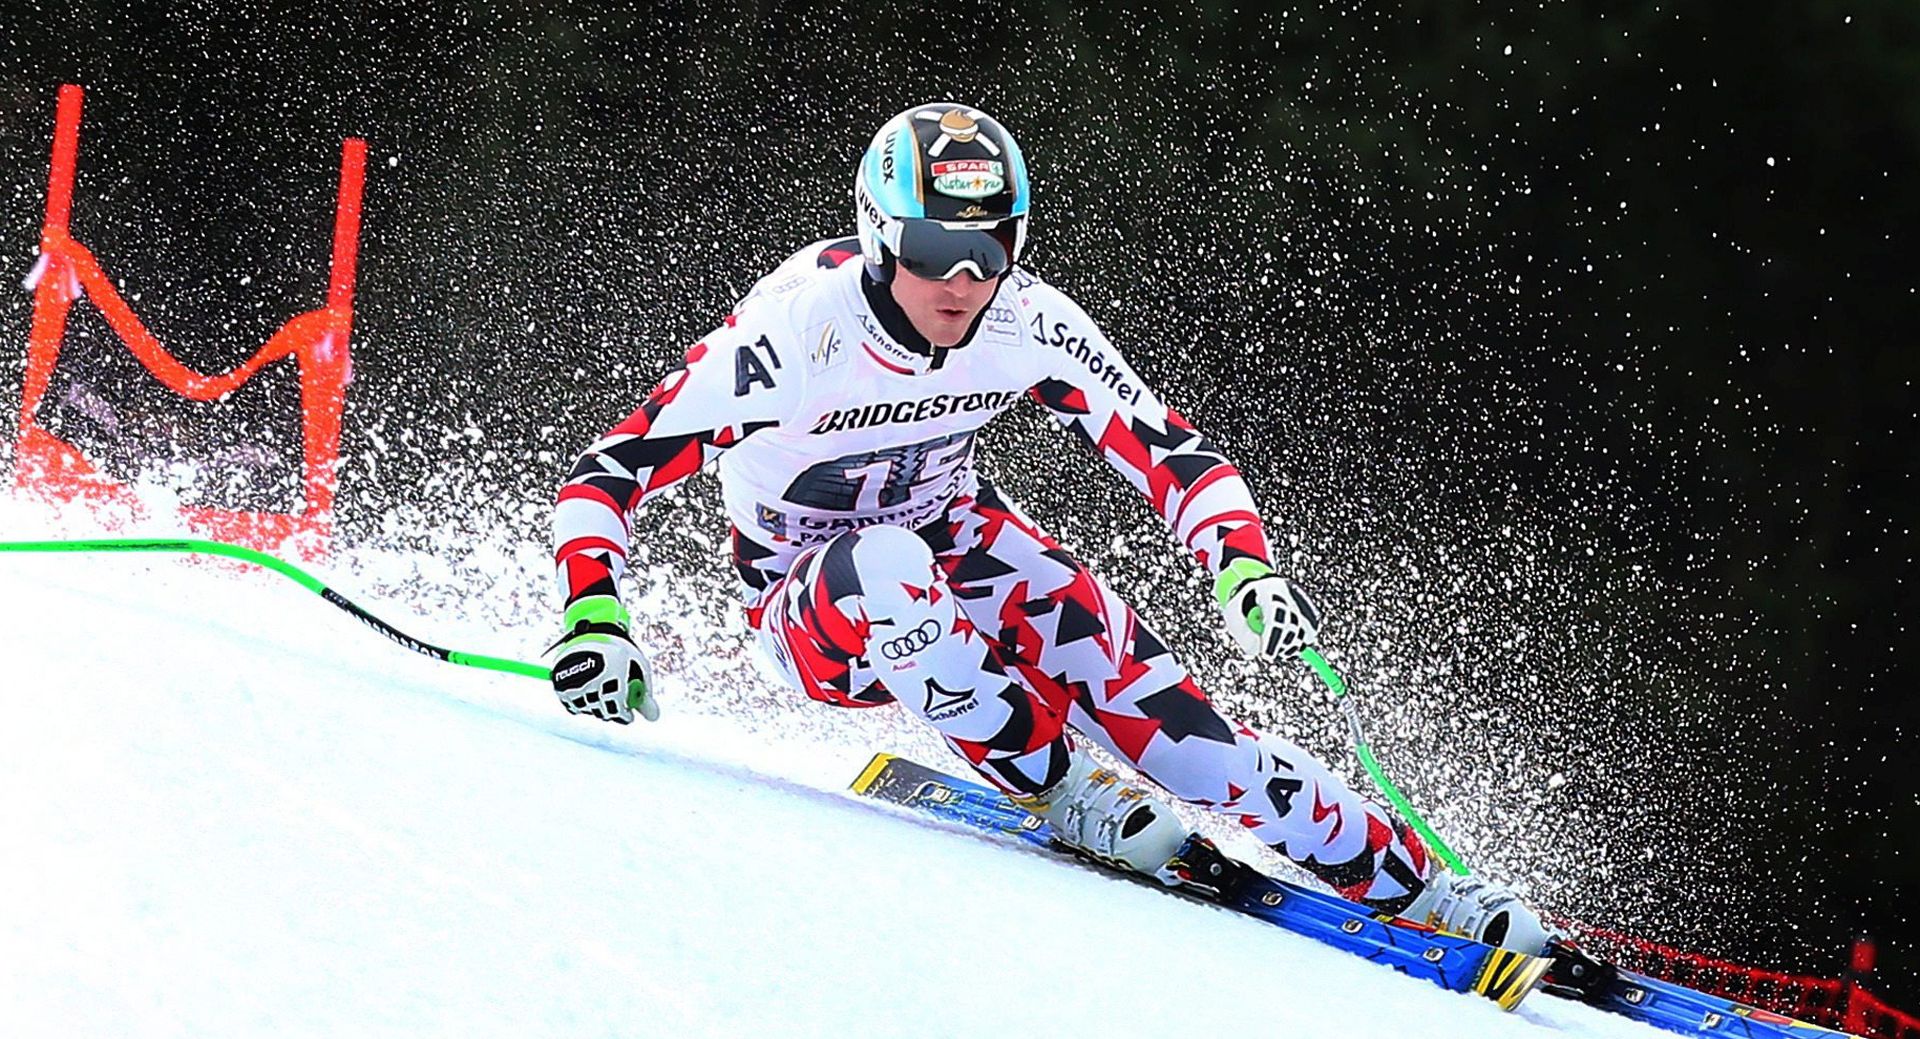 epa05131449 Hannes Reichelt of Austria speeds down the slope during a training run for the Men's Downhill race at the FIS Alpine Skiing World Cup in Garmisch Partenkirchen, Germany, 28 January 2016.  EPA/KARL-JOSEF HILDENBRAND